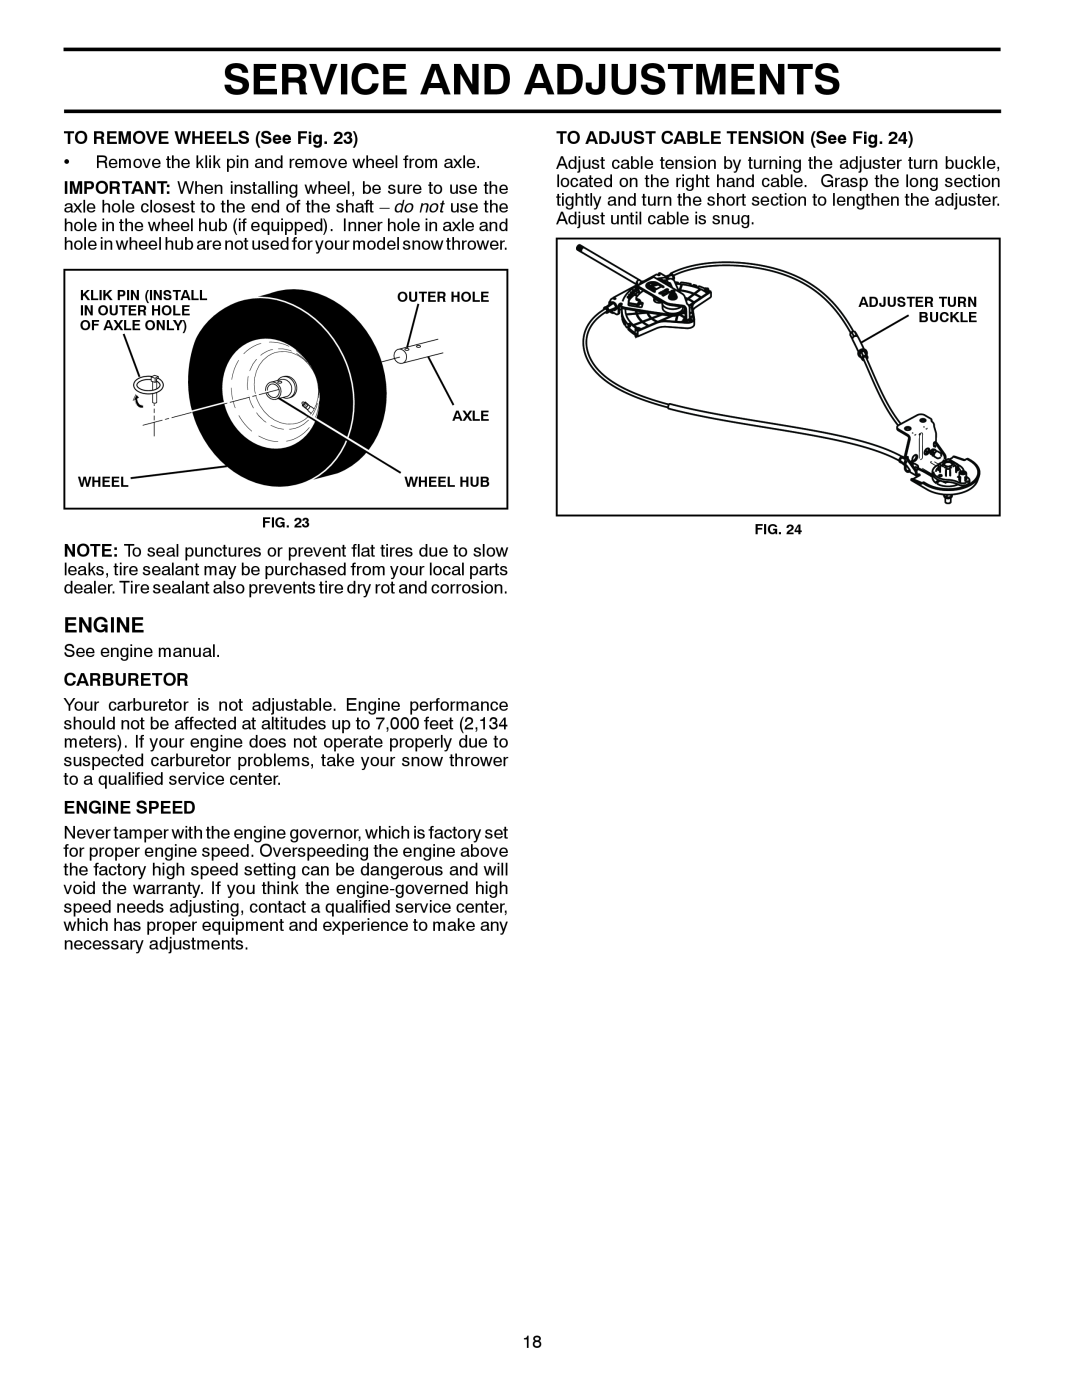 Poulan 429890 owner manual Service And Adjustments, TO REMOVE WHEELS See Fig, Carburetor, Engine Speed 